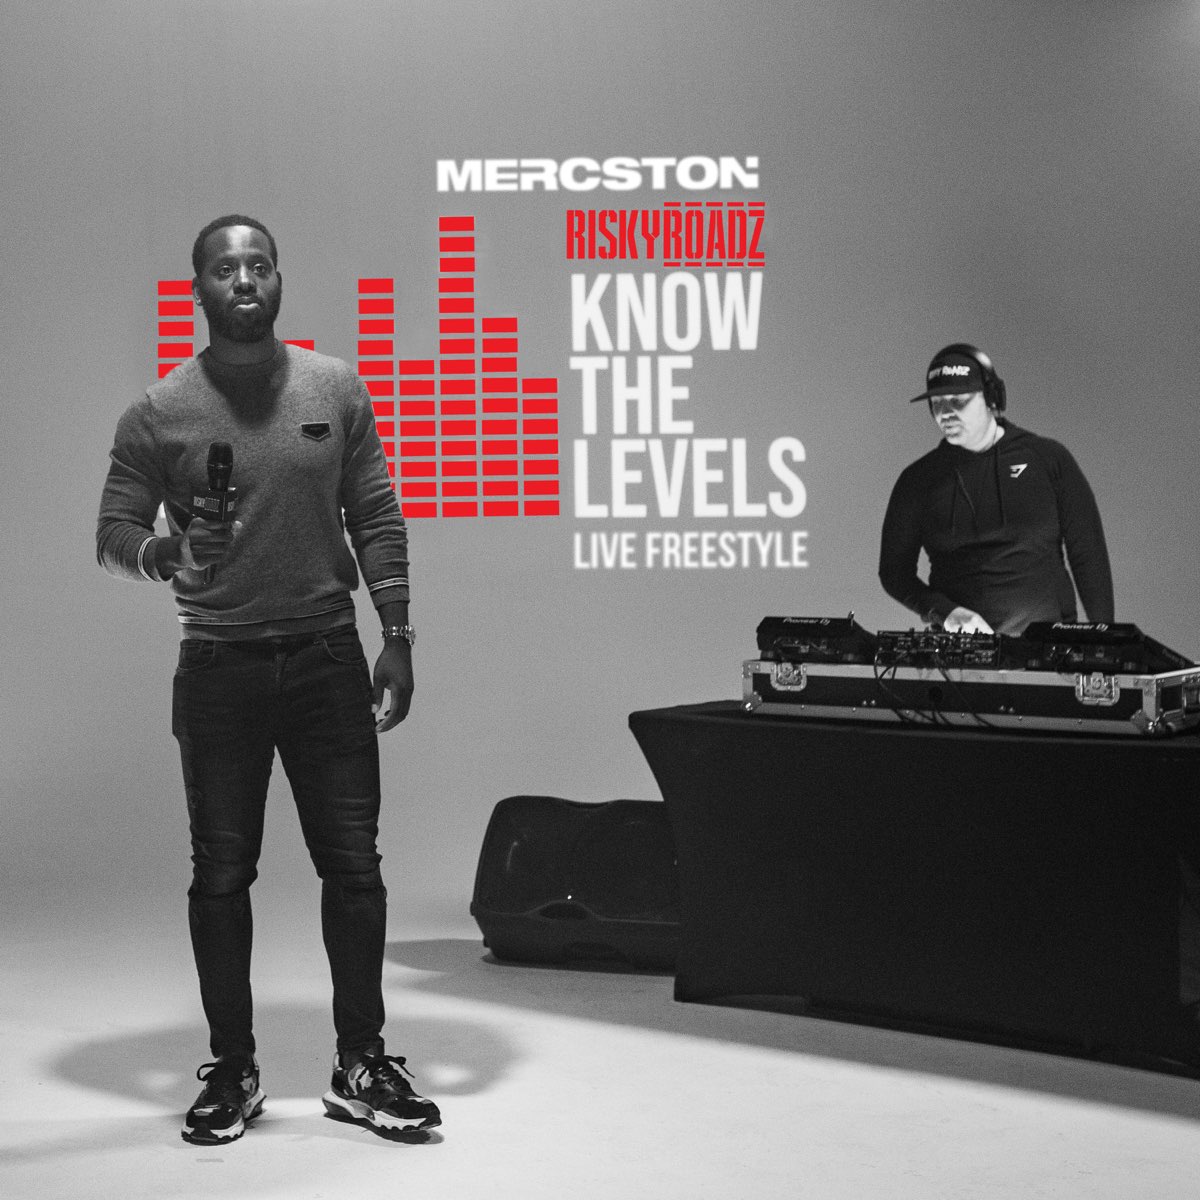 Levels live. Mercston. Live in Freestyle.